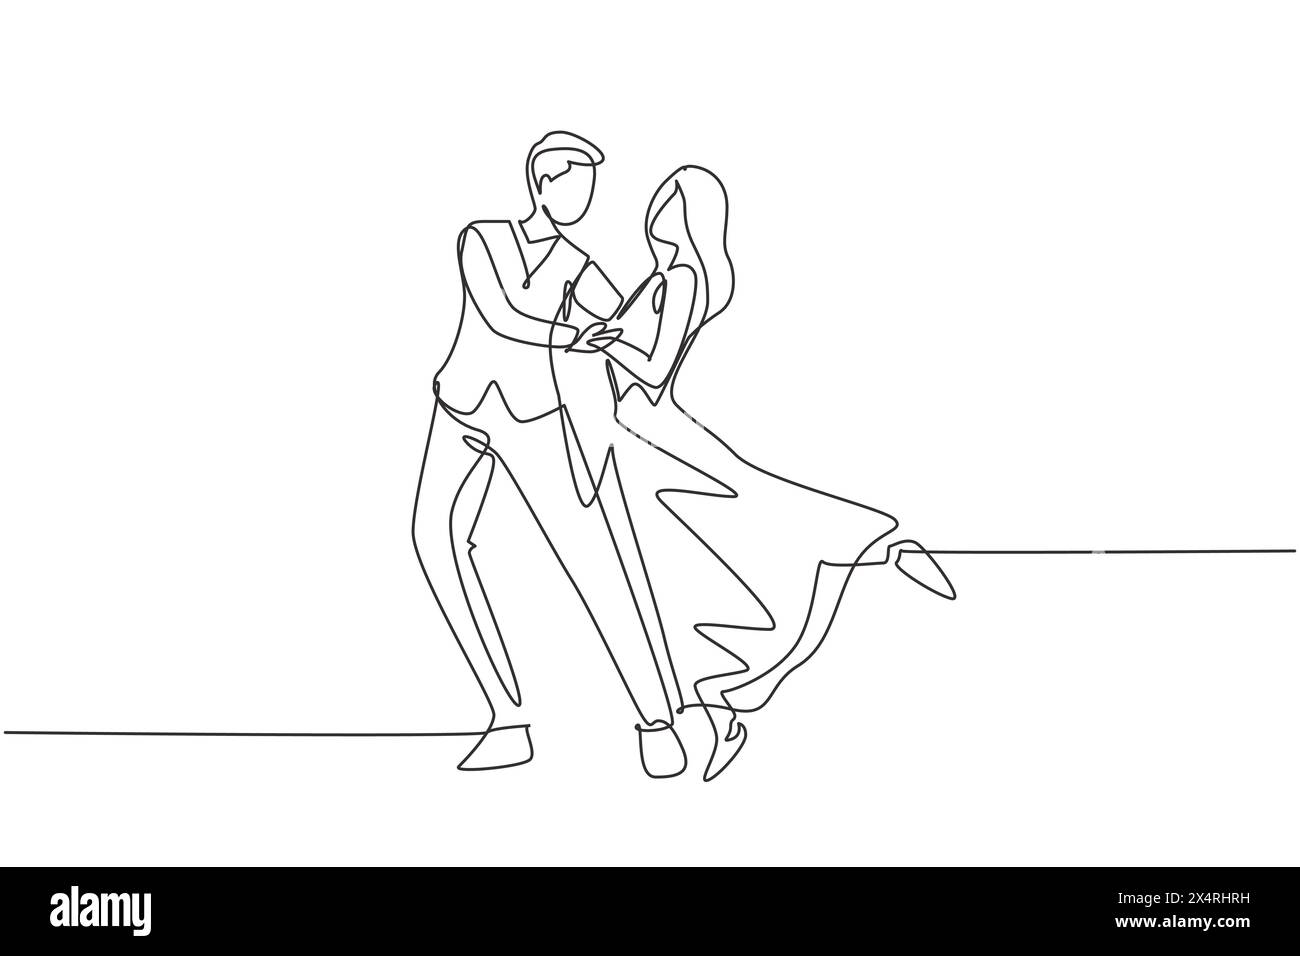 Single continuous line drawing romantic man and woman professional dancer couple dancing tango, waltz dances on dancing contest dancefloor. Dynamic on Stock Vector